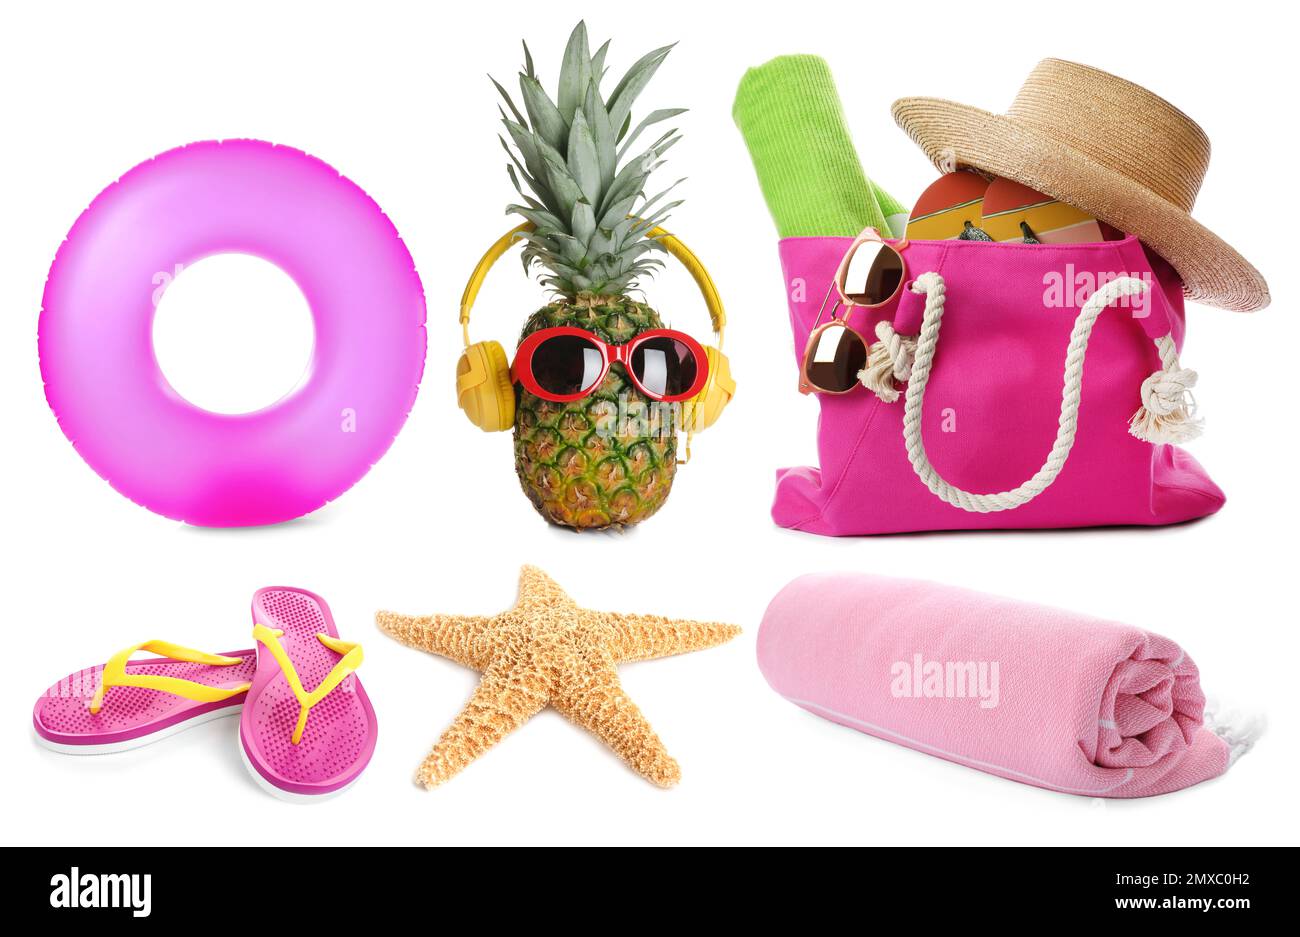 Set of different stylish beach objects on white background Stock Photo